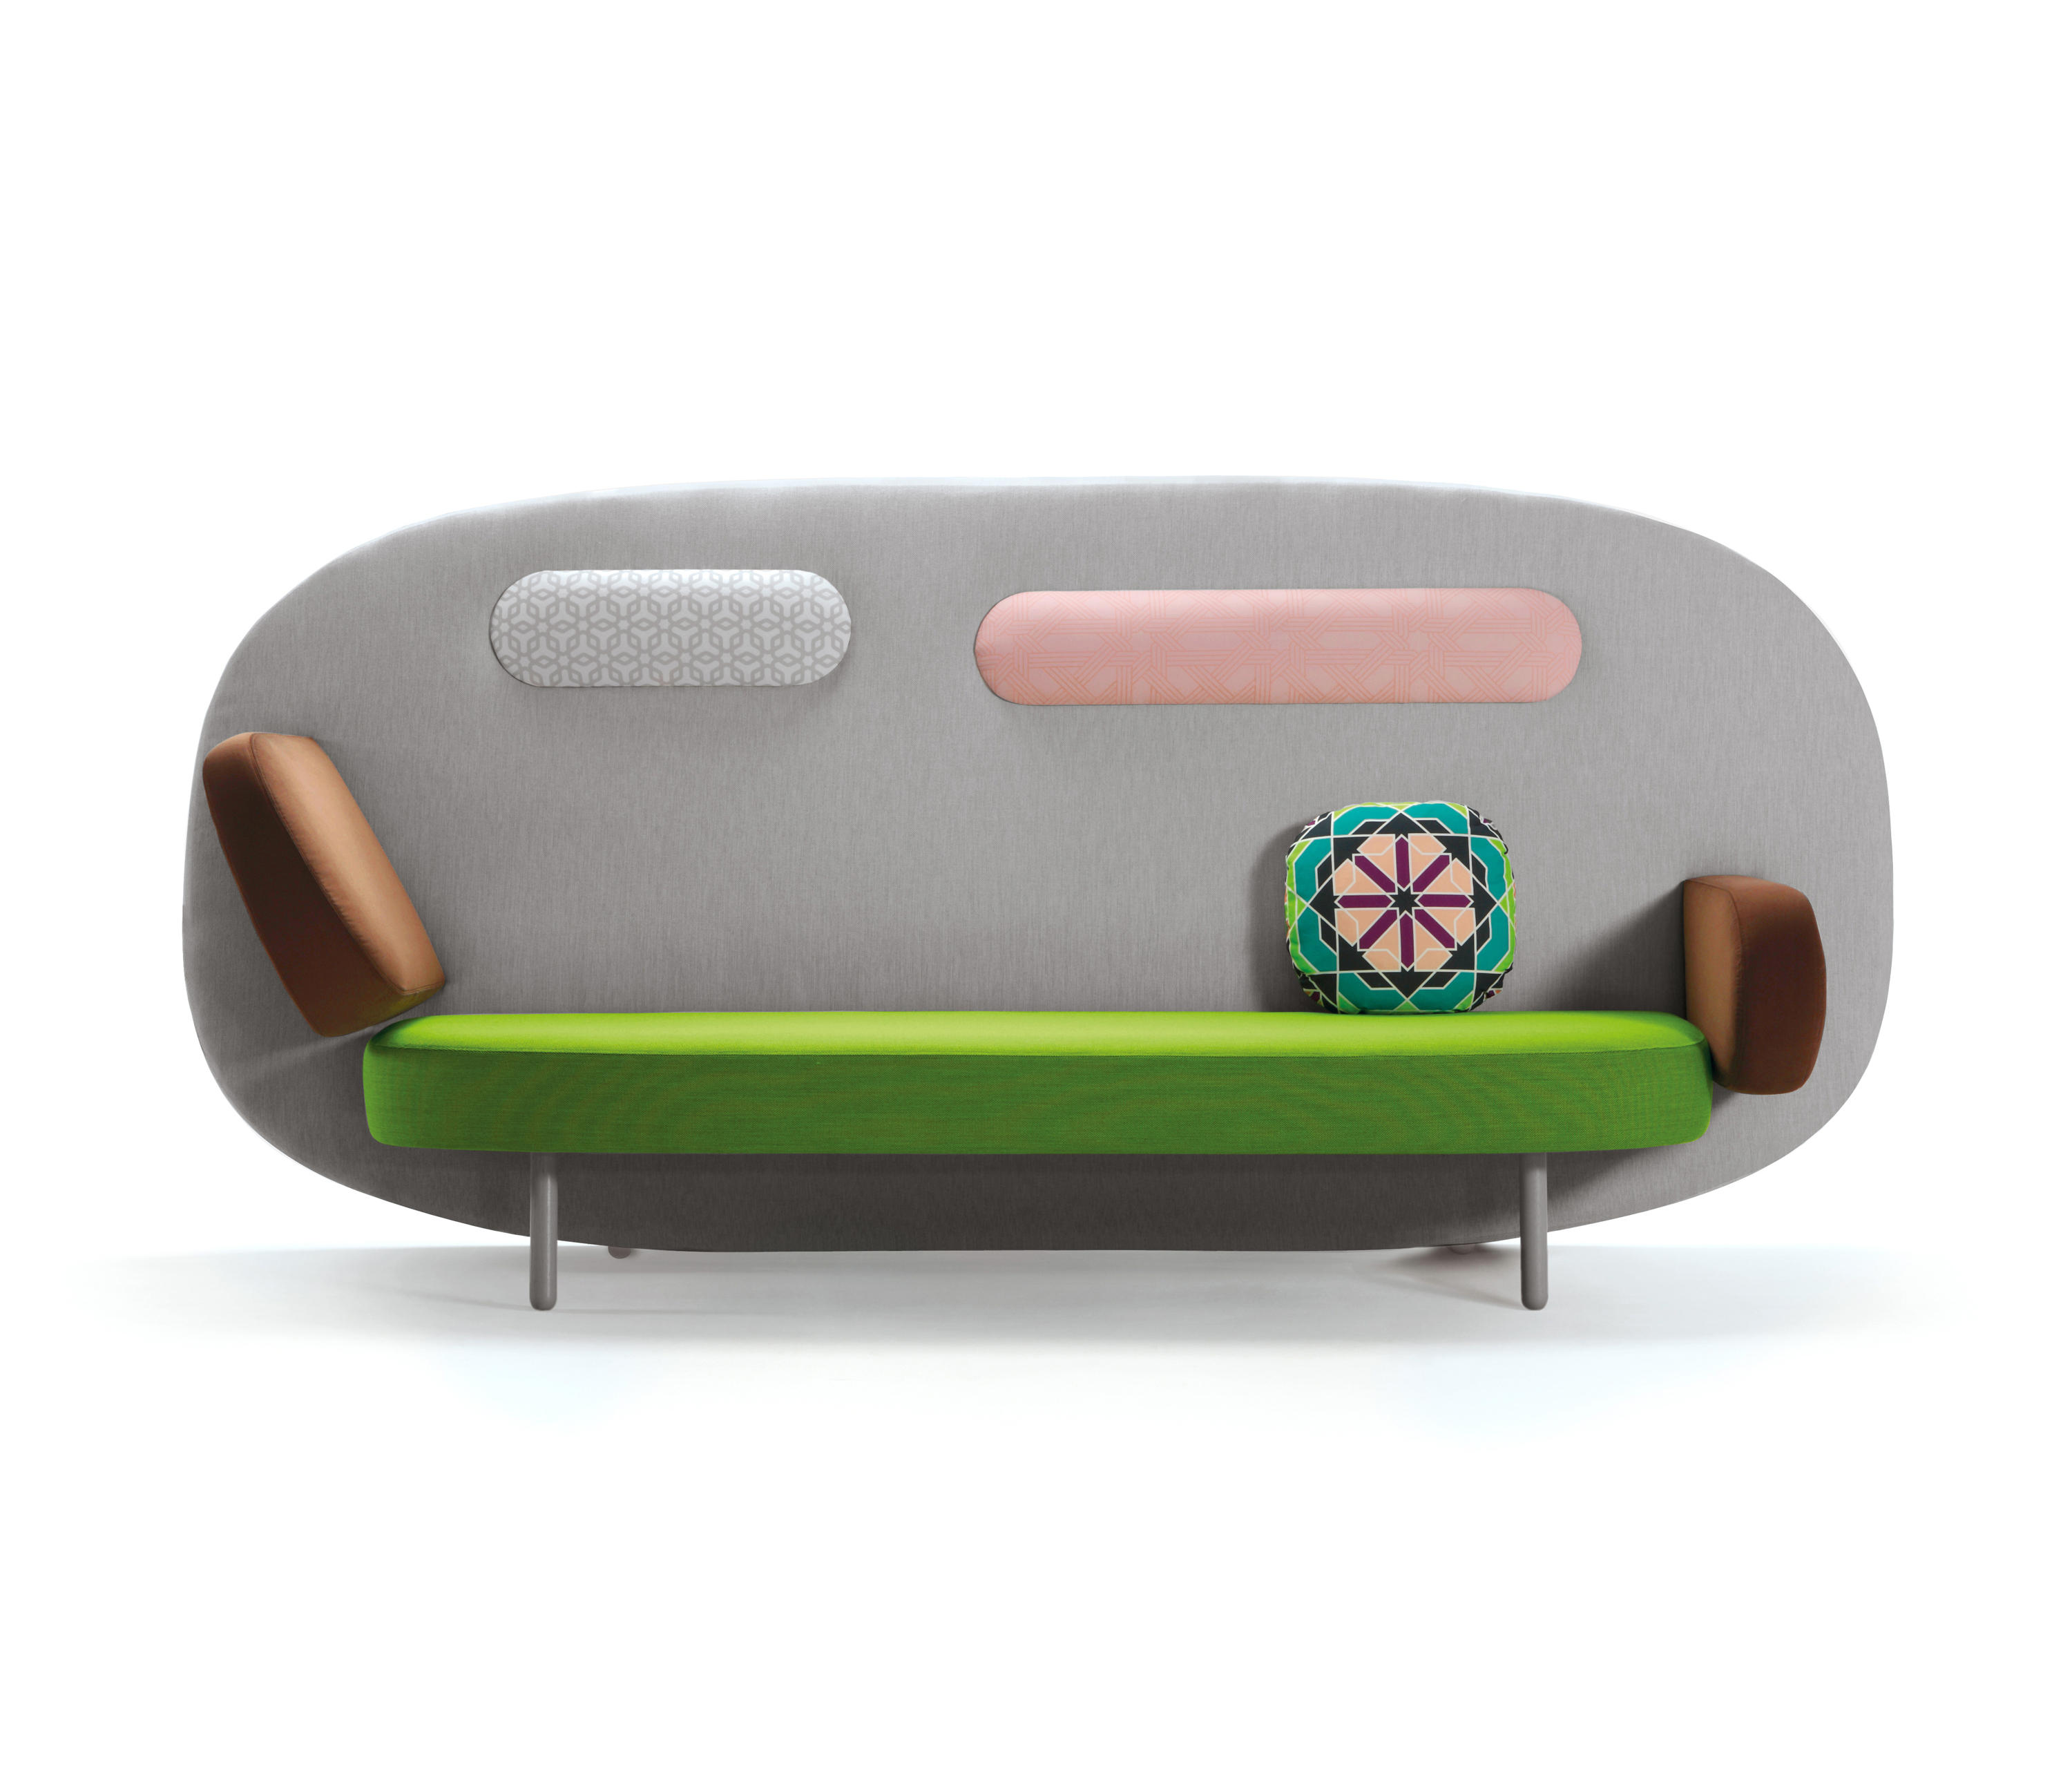  FLOAT  SOFA  290 Lounge sofas from Sancal Architonic